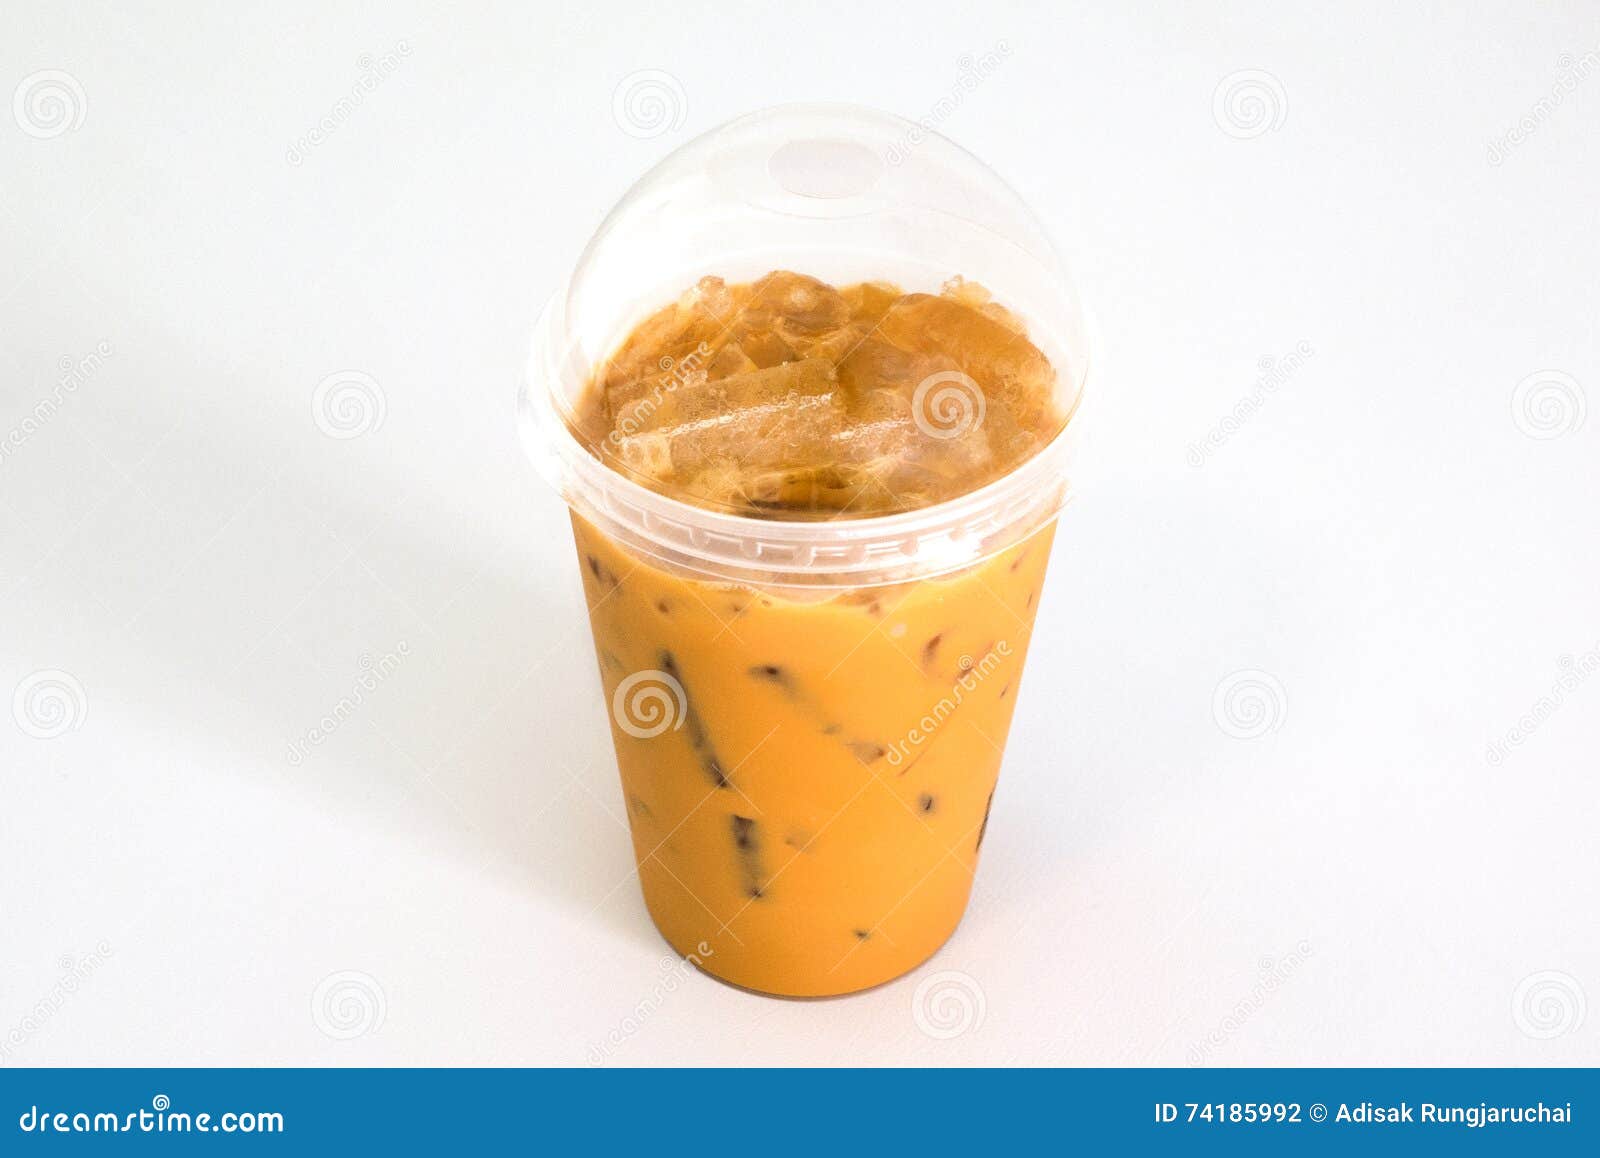 Iced Thai Tea in Plastic Cup Stock Photo - Image of cube, asian: 74185992